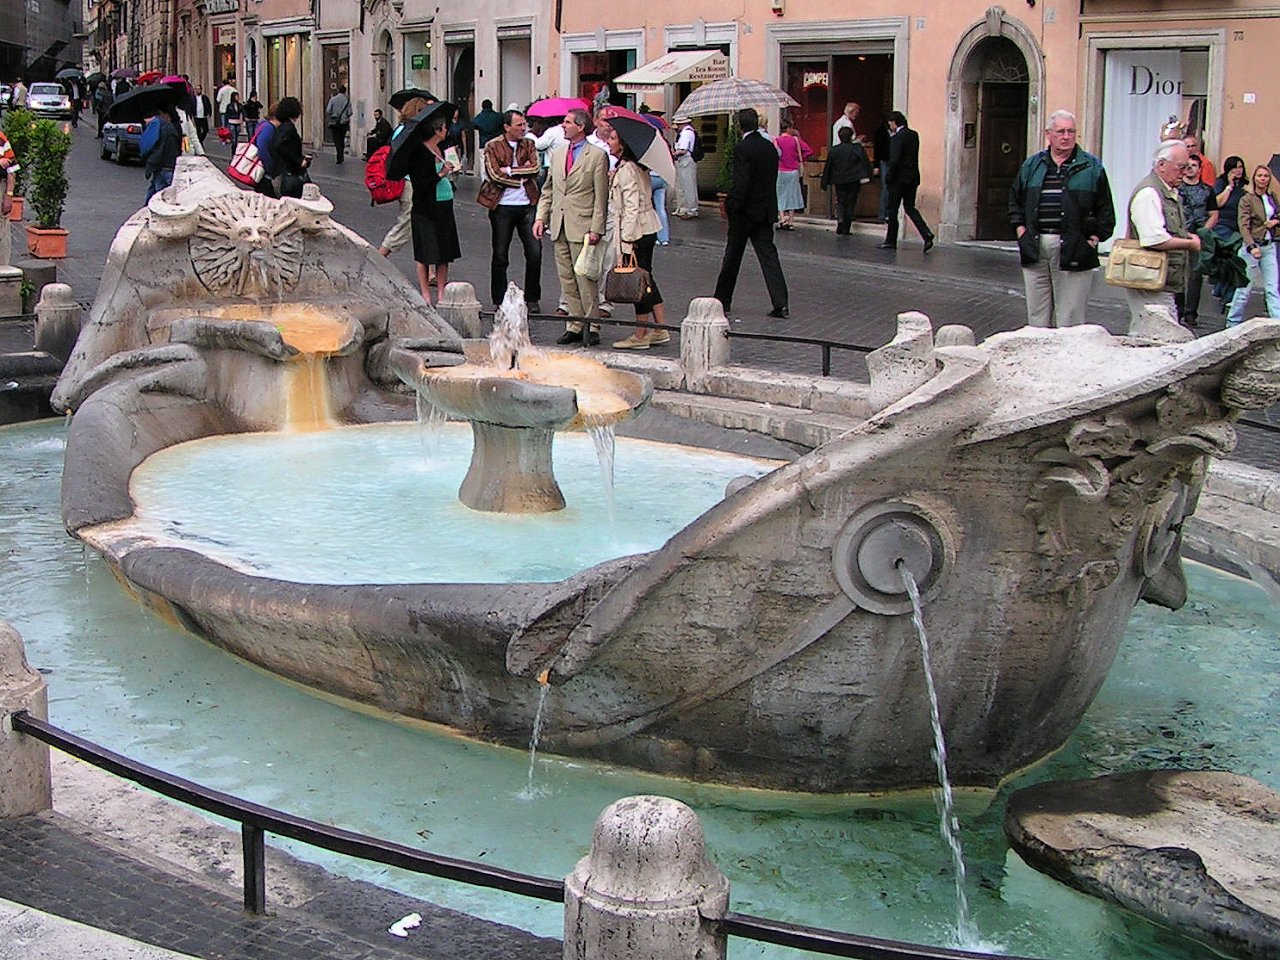 Spanish Steps, Piazza di Spagna, Rome Attractions, Best Places to visit in Rome 2